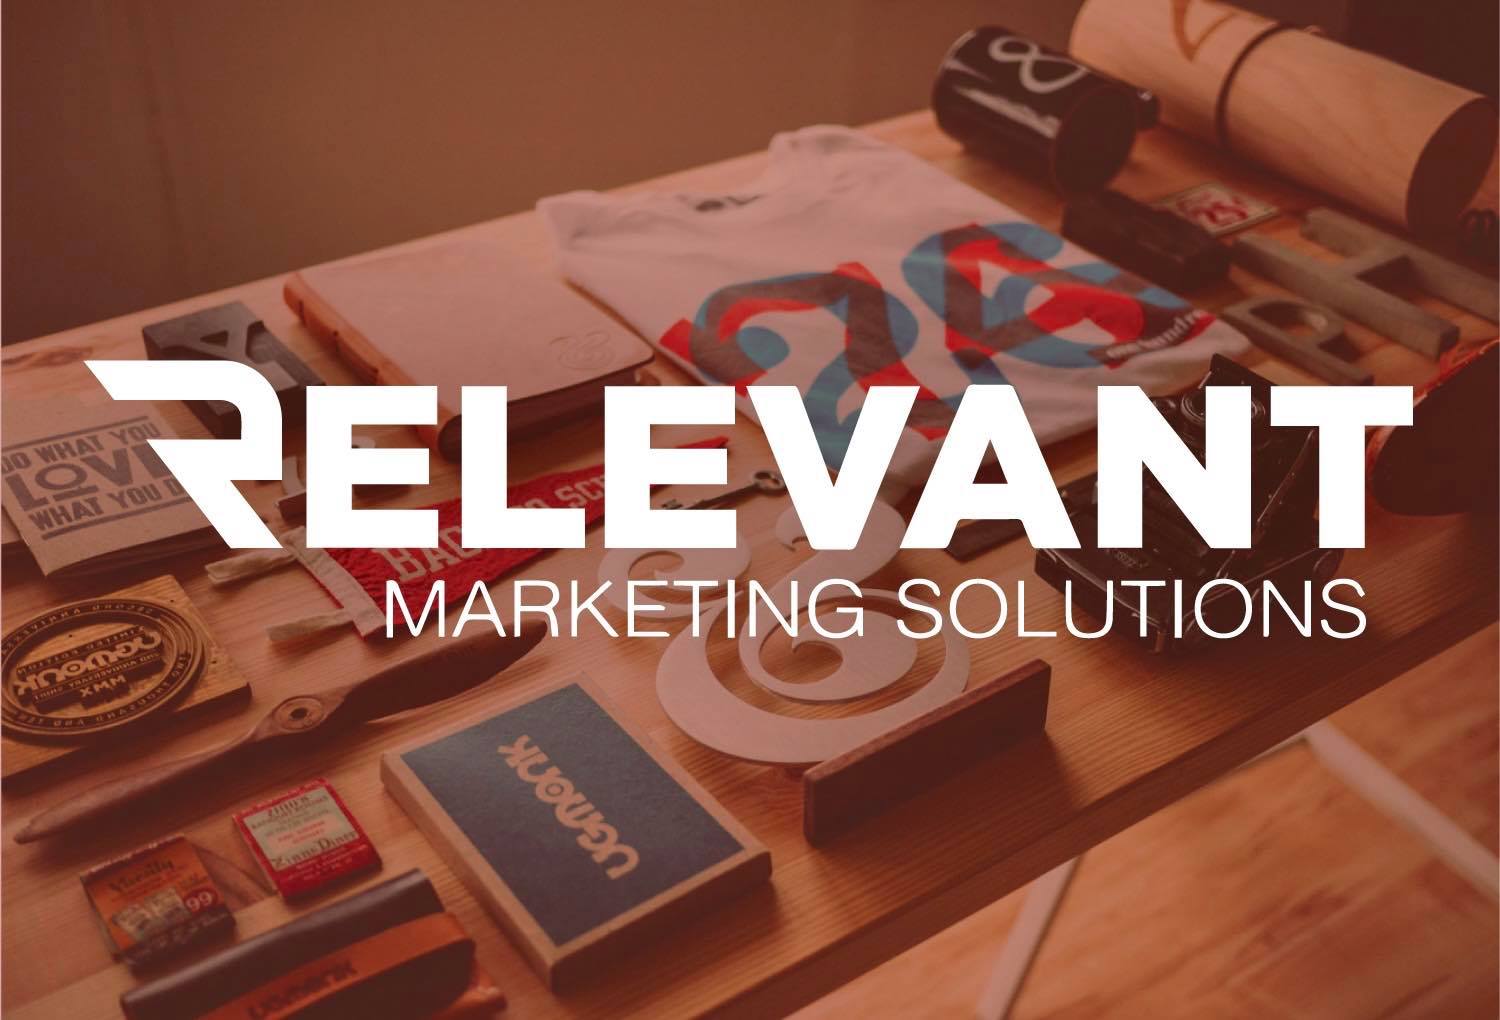 Relevant Marketing Solutions